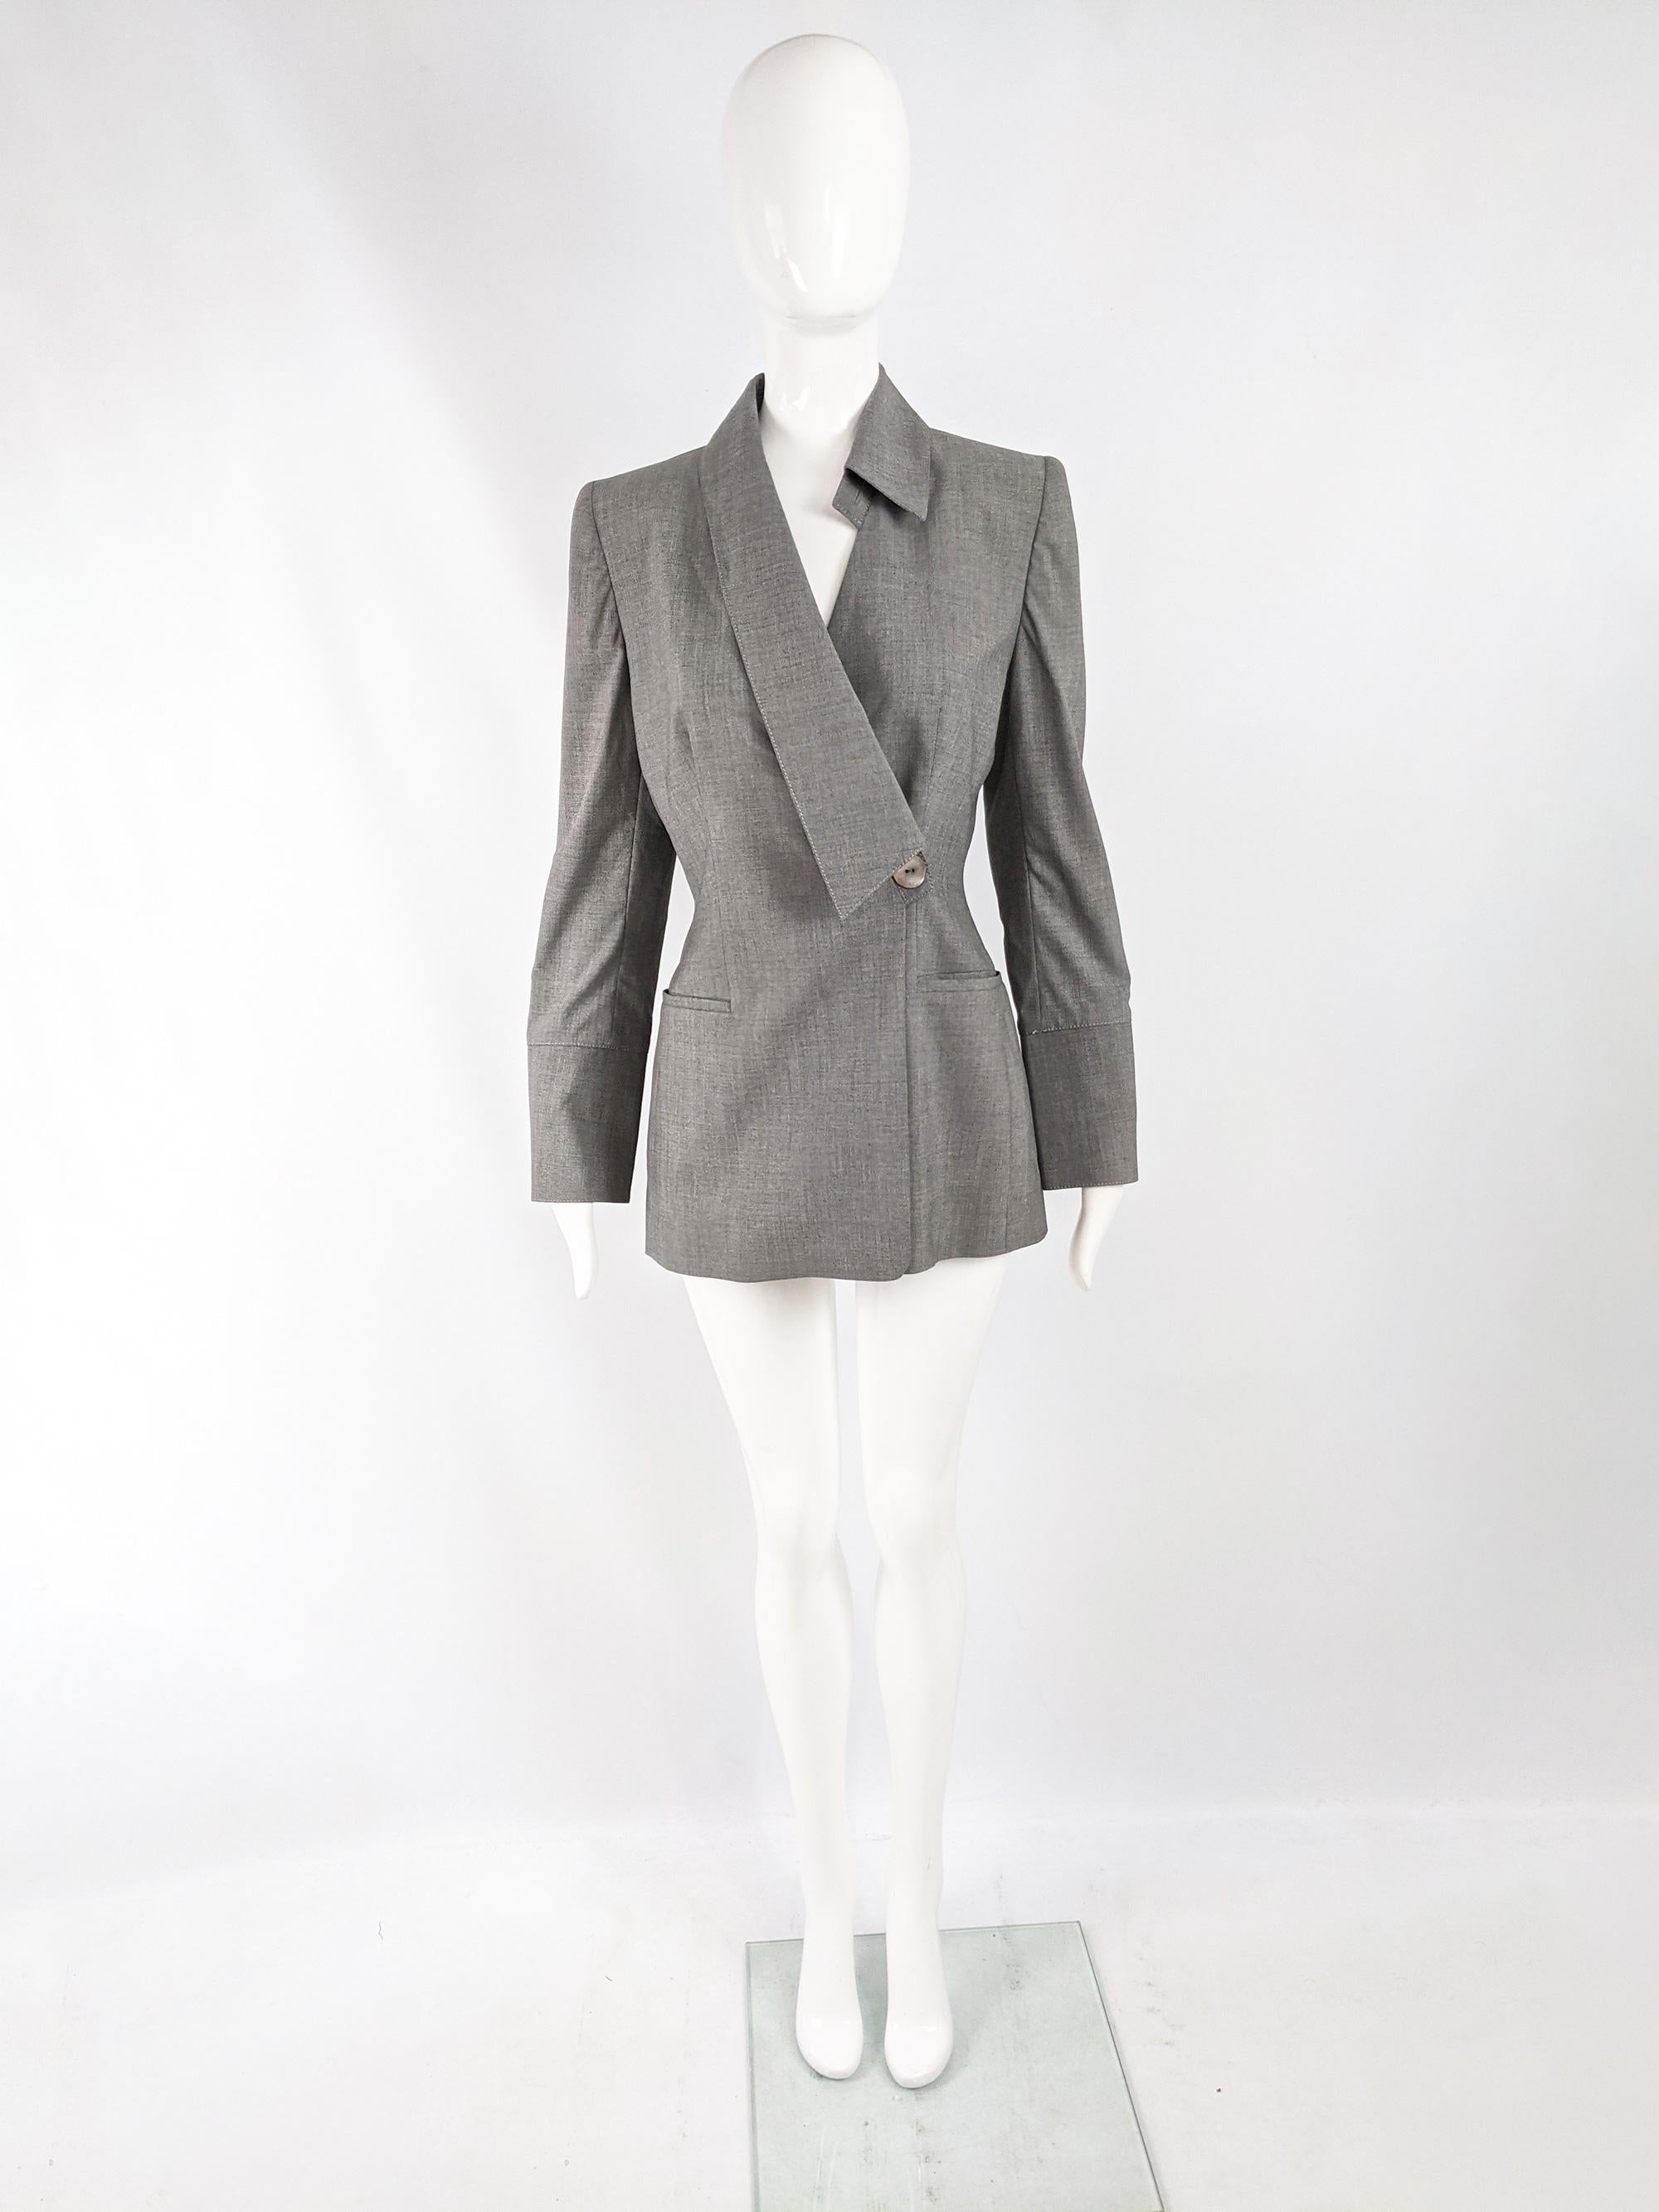 A chic vintage womens blazer from the 90s by luxury Italian fashion designer, Gai Mattiolo. In a grey virgin wool and spandex with an asymmetric collar, mother of pearl buttons on the front and sleeves and small shoulder pads that give an edge to